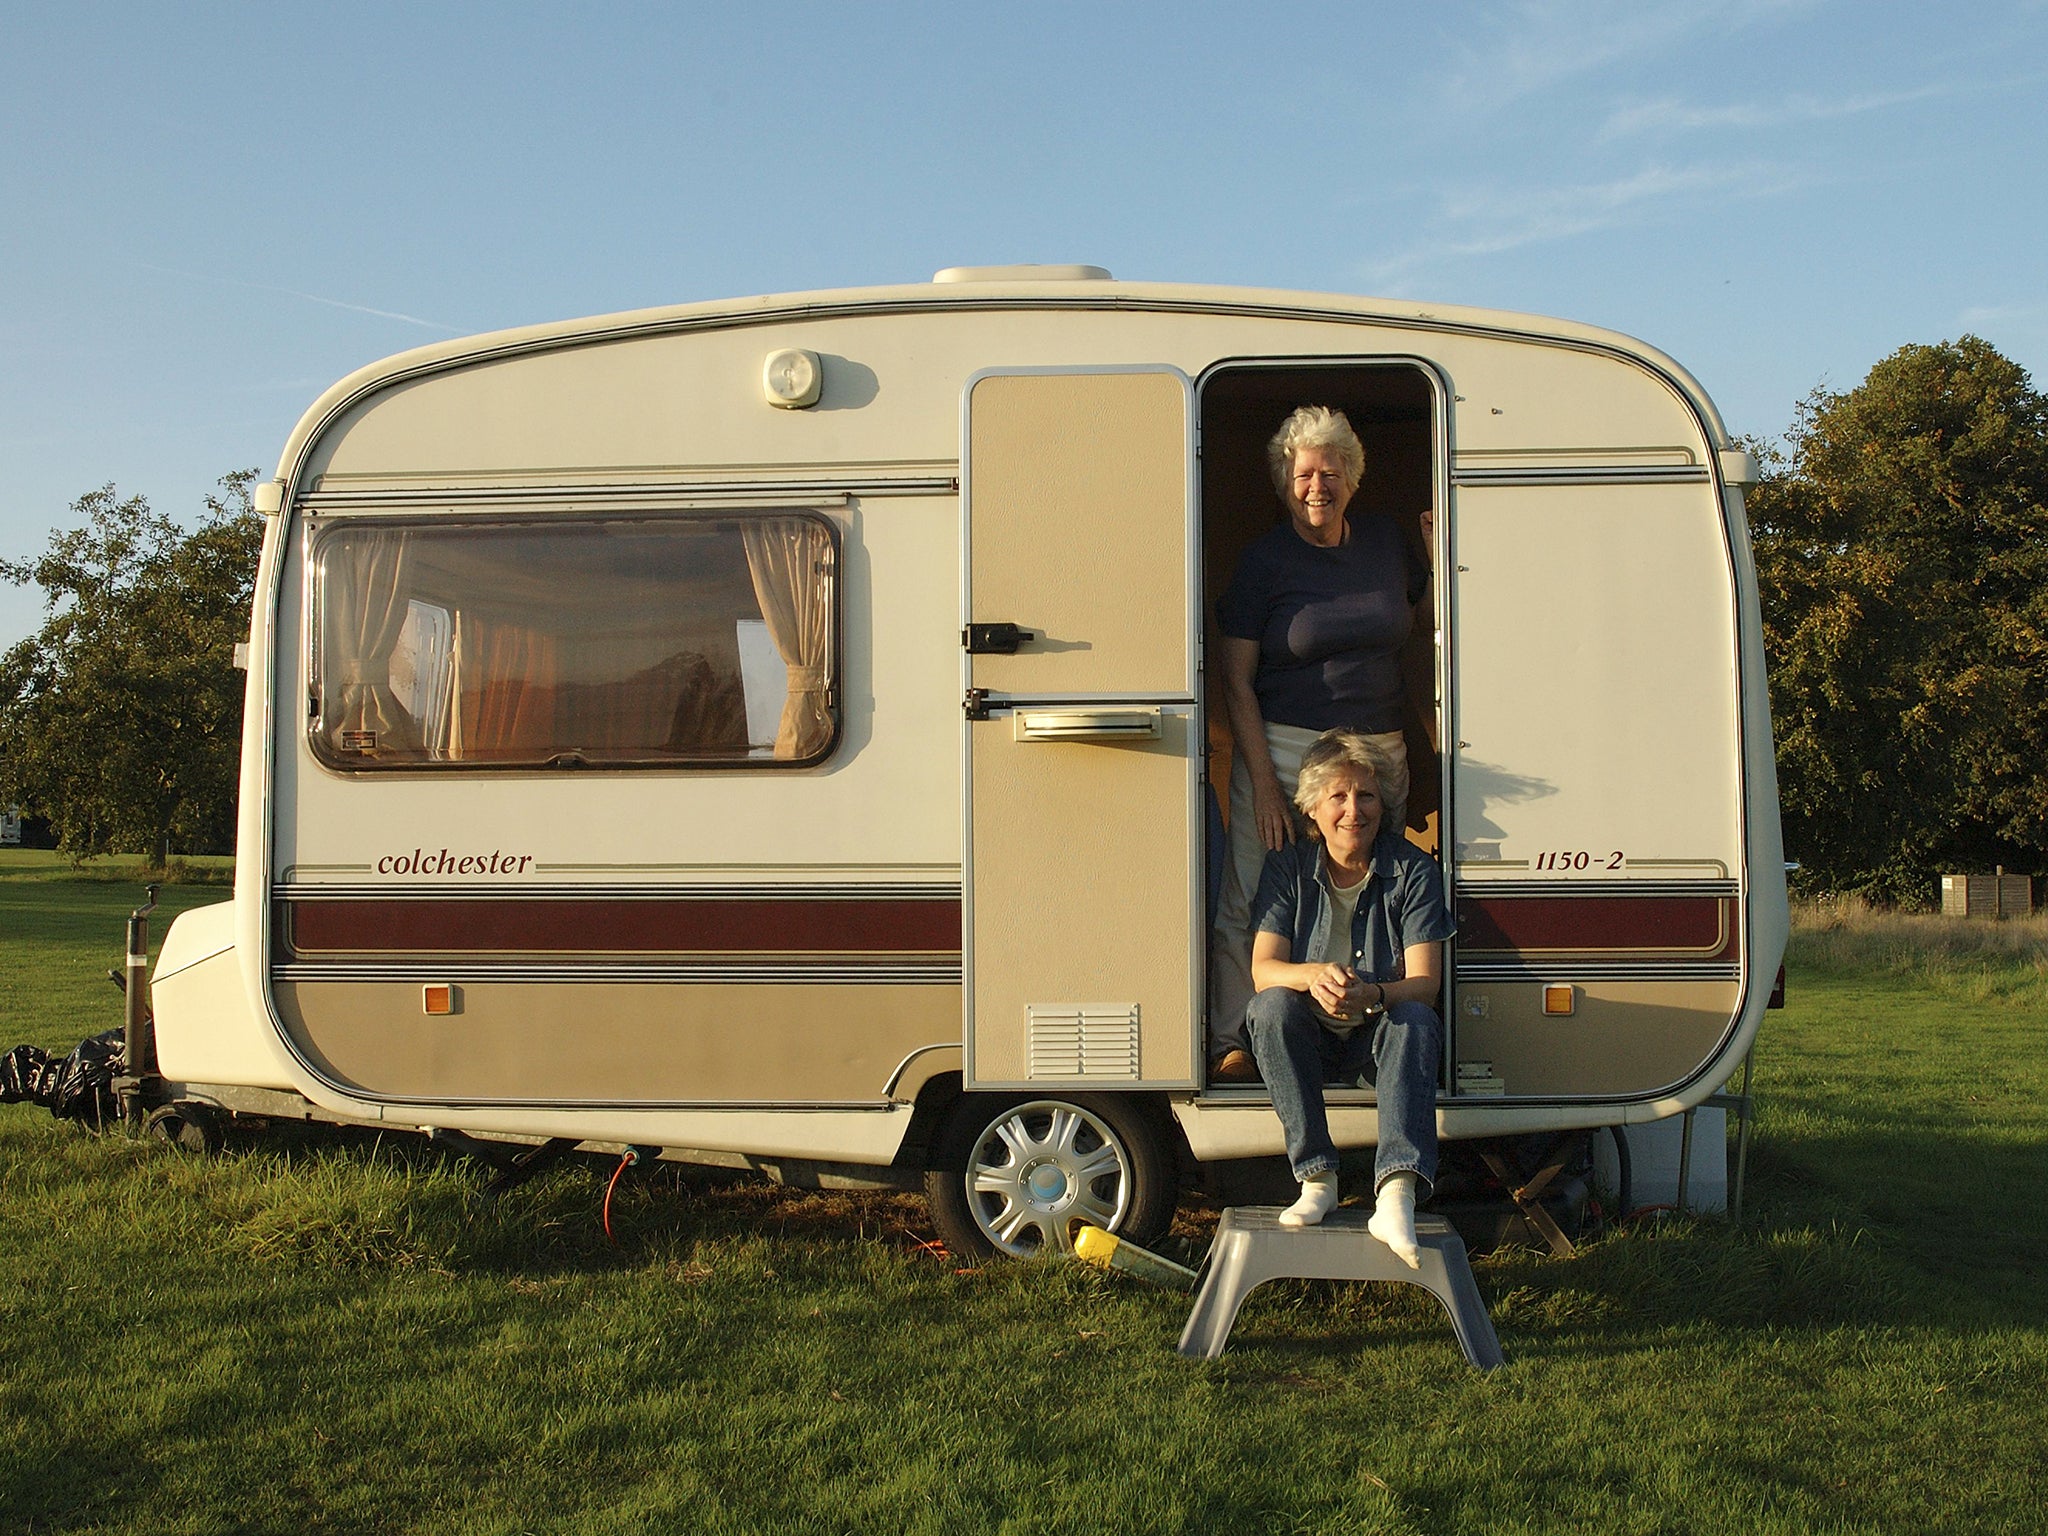 More than 12,000 housing benefit payments are being made to caravans and park homes